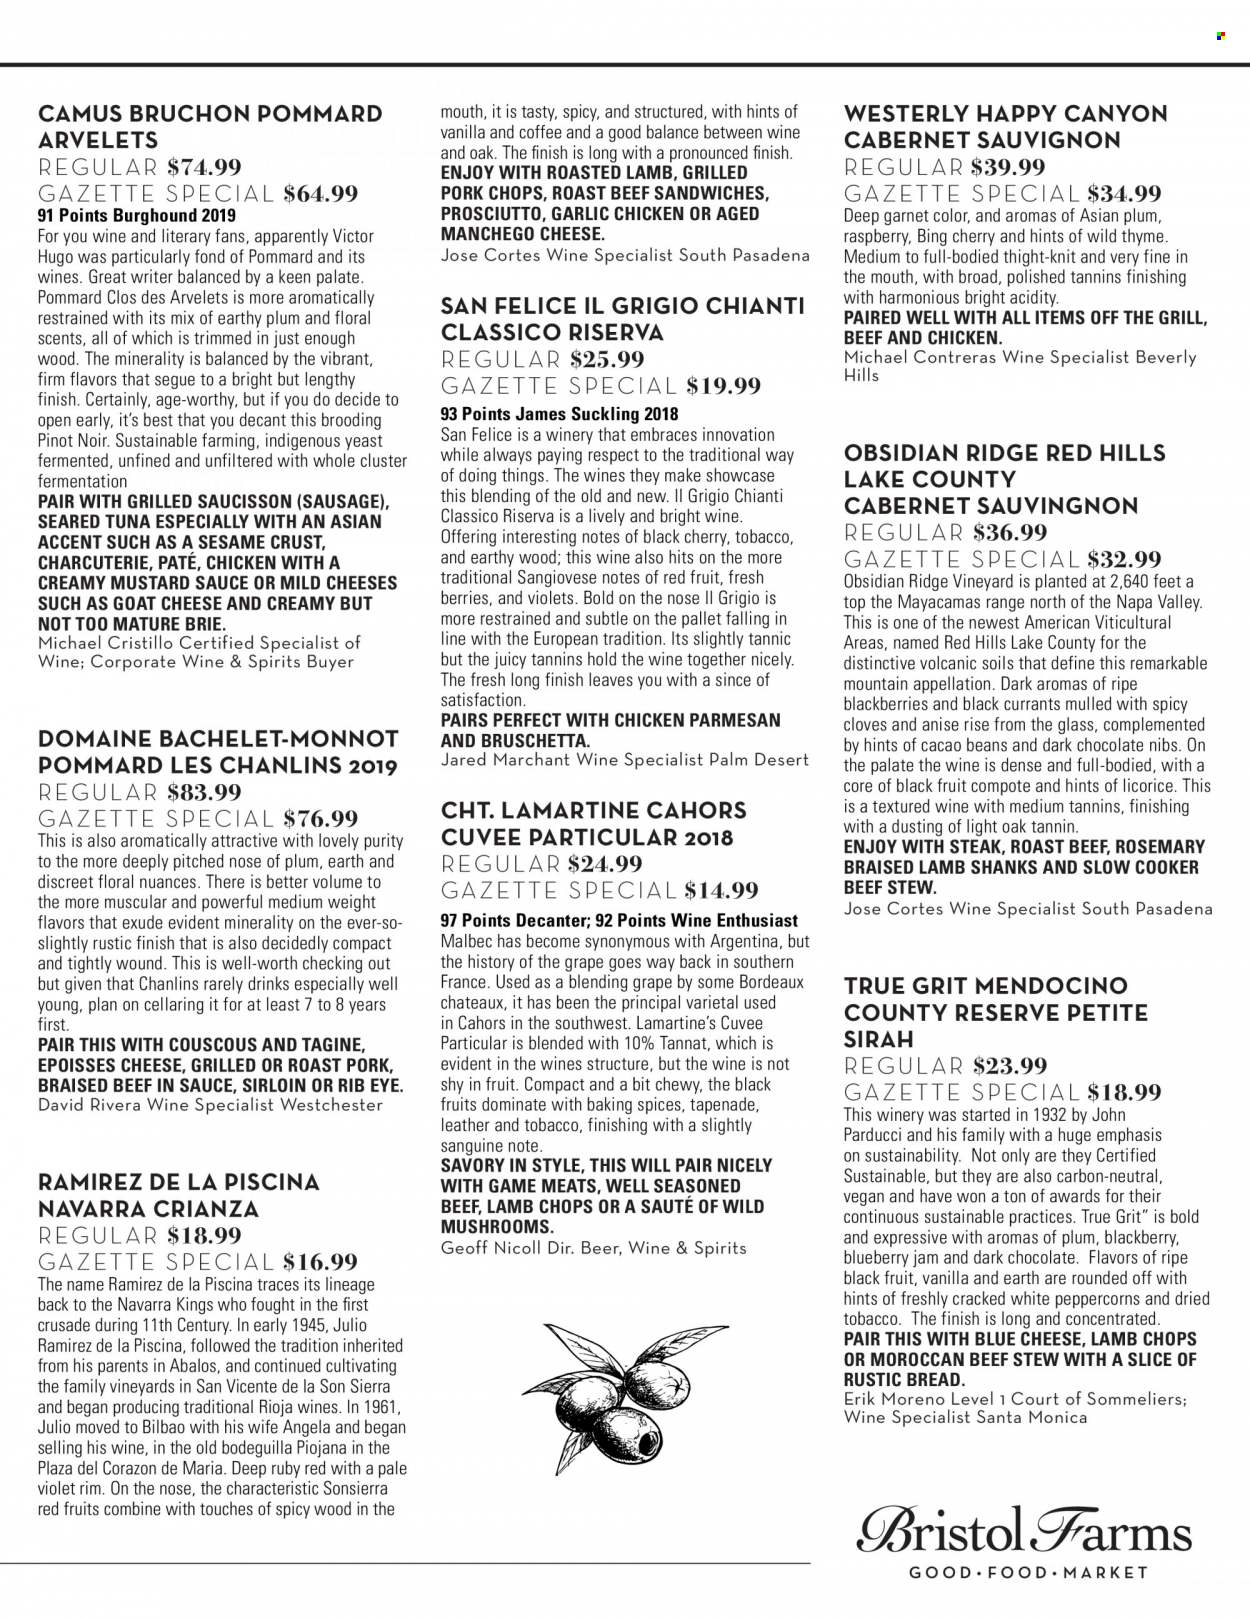 thumbnail - Bristol Farms Flyer - 05/01/2022 - 05/31/2022 - Sales products - mushrooms, bread, garlic, cherries, tuna, sandwich, bruschetta, prosciutto, sausage, blue cheese, goat cheese, Manchego, cheese, brie, yeast, chocolate, dark chocolate, compote, couscous, rosemary, cloves, mustard, mustard sauce, Classico, blueberry jam, fruit jam, coffee, Cabernet Sauvignon, Pinot Noir, Cuvée, beer, Purity, beef meat, steak, roast beef, pork chops, pork meat, lamb chops, lamb meat. Page 3.